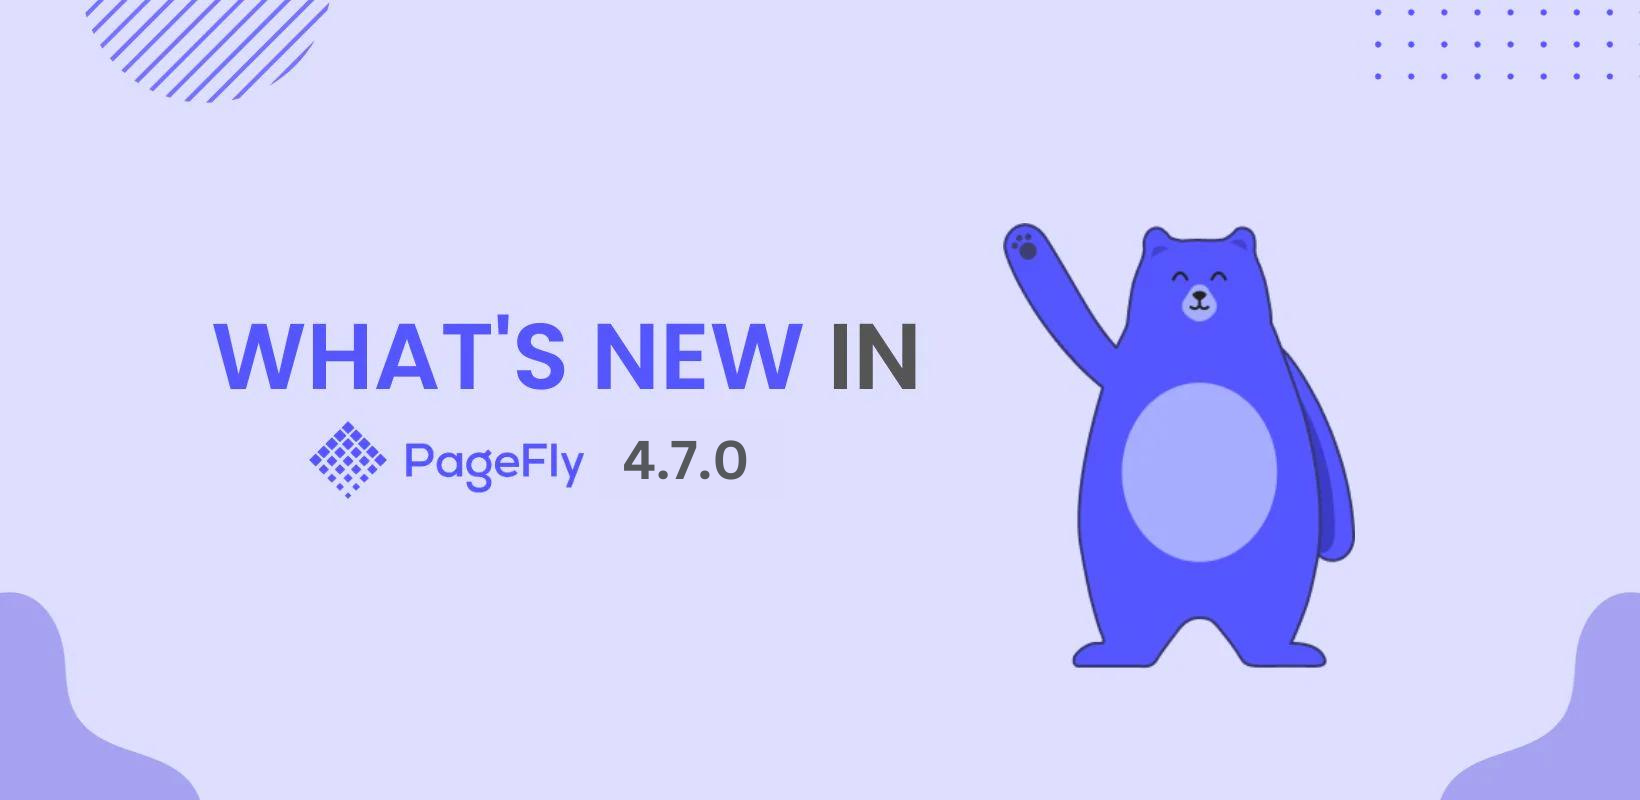 PageFly 4.7.0: New Slide Show Elements. Uninstall Policy Update